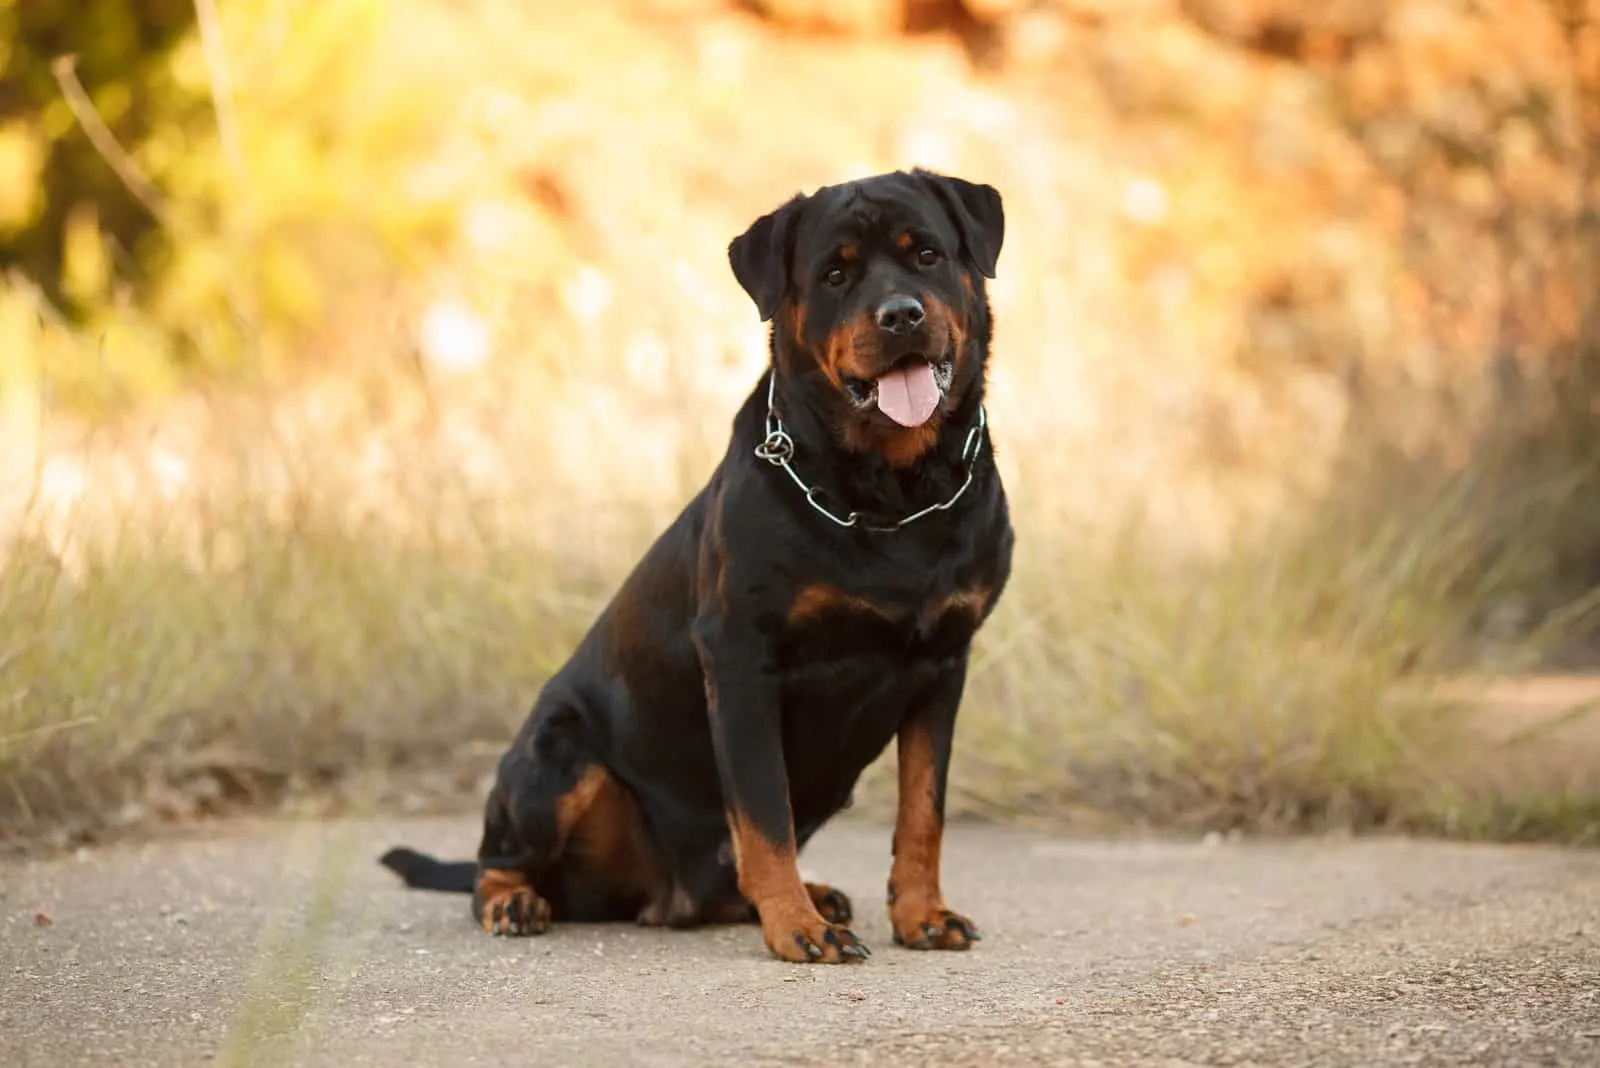 The Rottweilers sit and stare in front of them